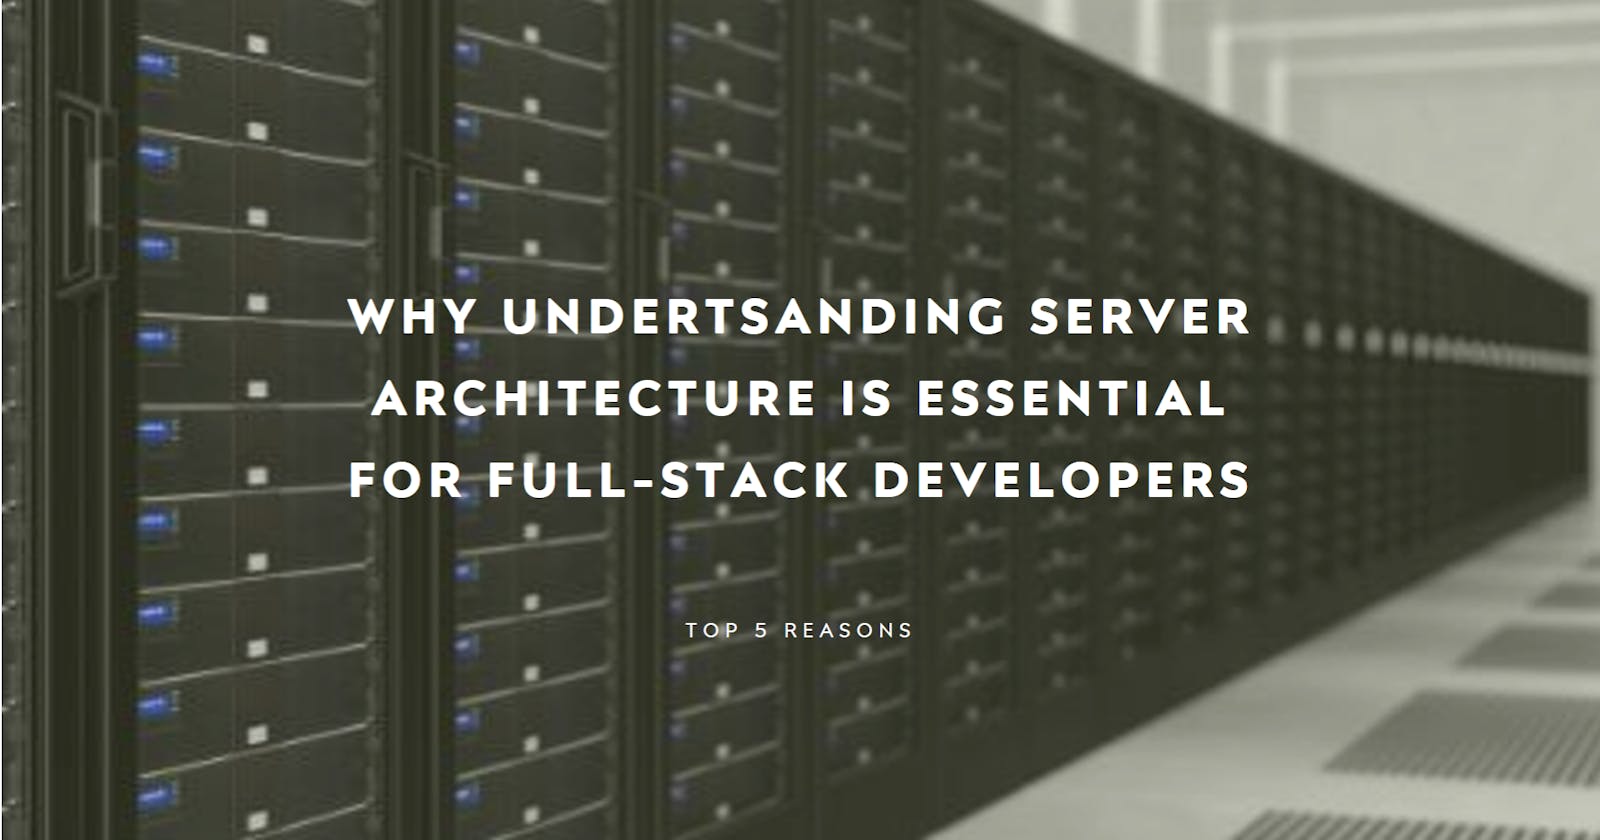 Top five reasons why understanding Server Architecture is essential to the Full-Stack Developer